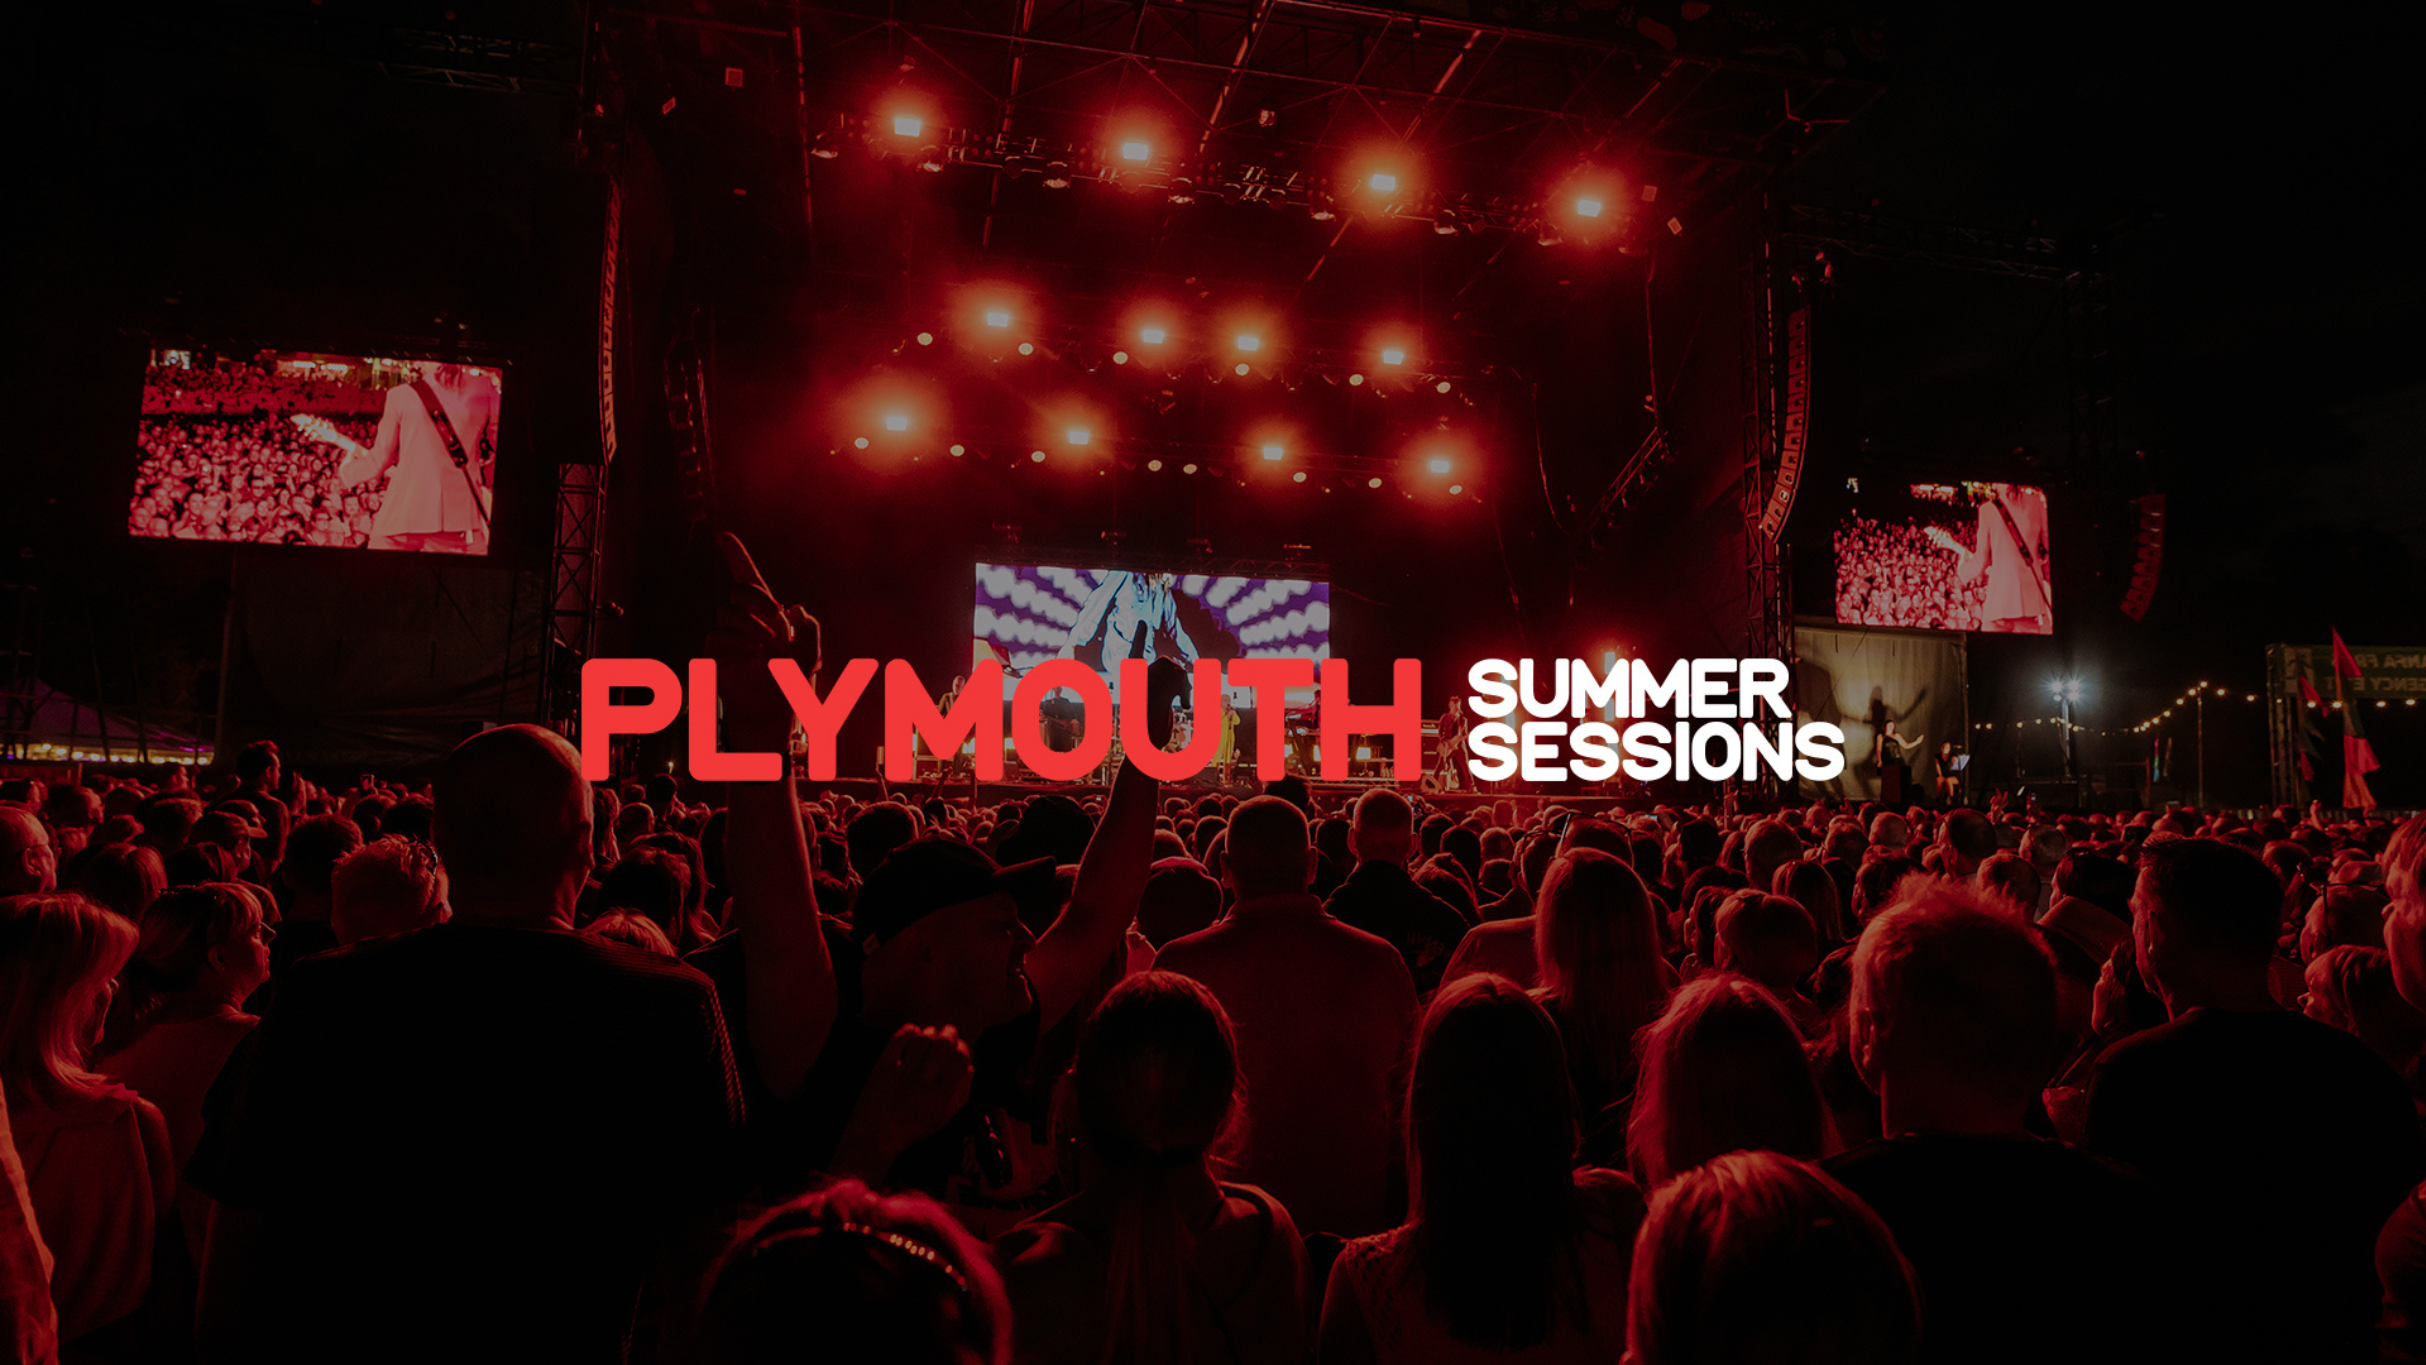 Plymouth Summer Sessions - Tom Jones in Plymouth promo photo for Priority From O2 presale offer code